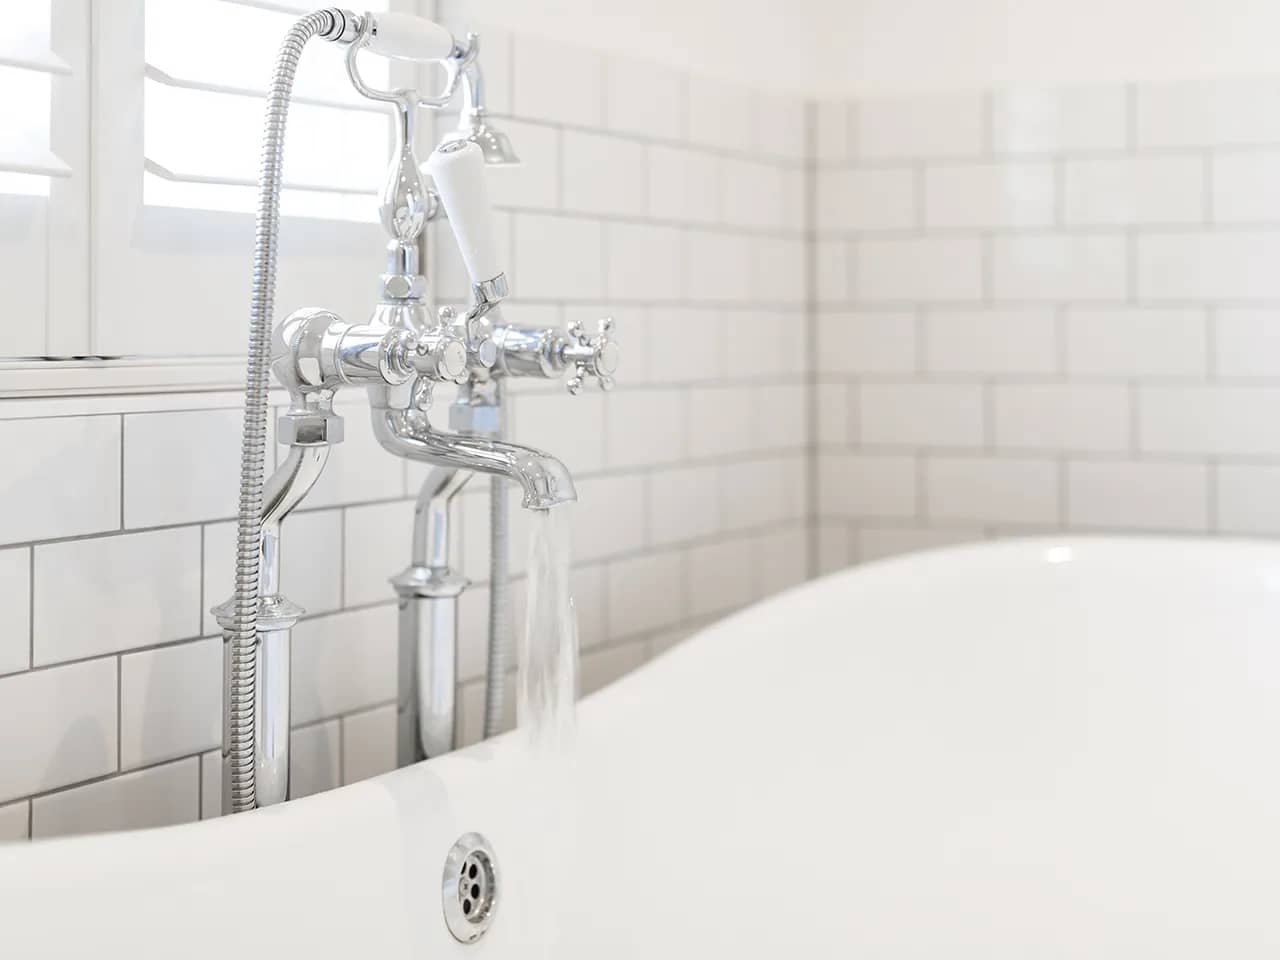 Bathtub Not Getting Hot Water: 9 Ways to Easily Fix It